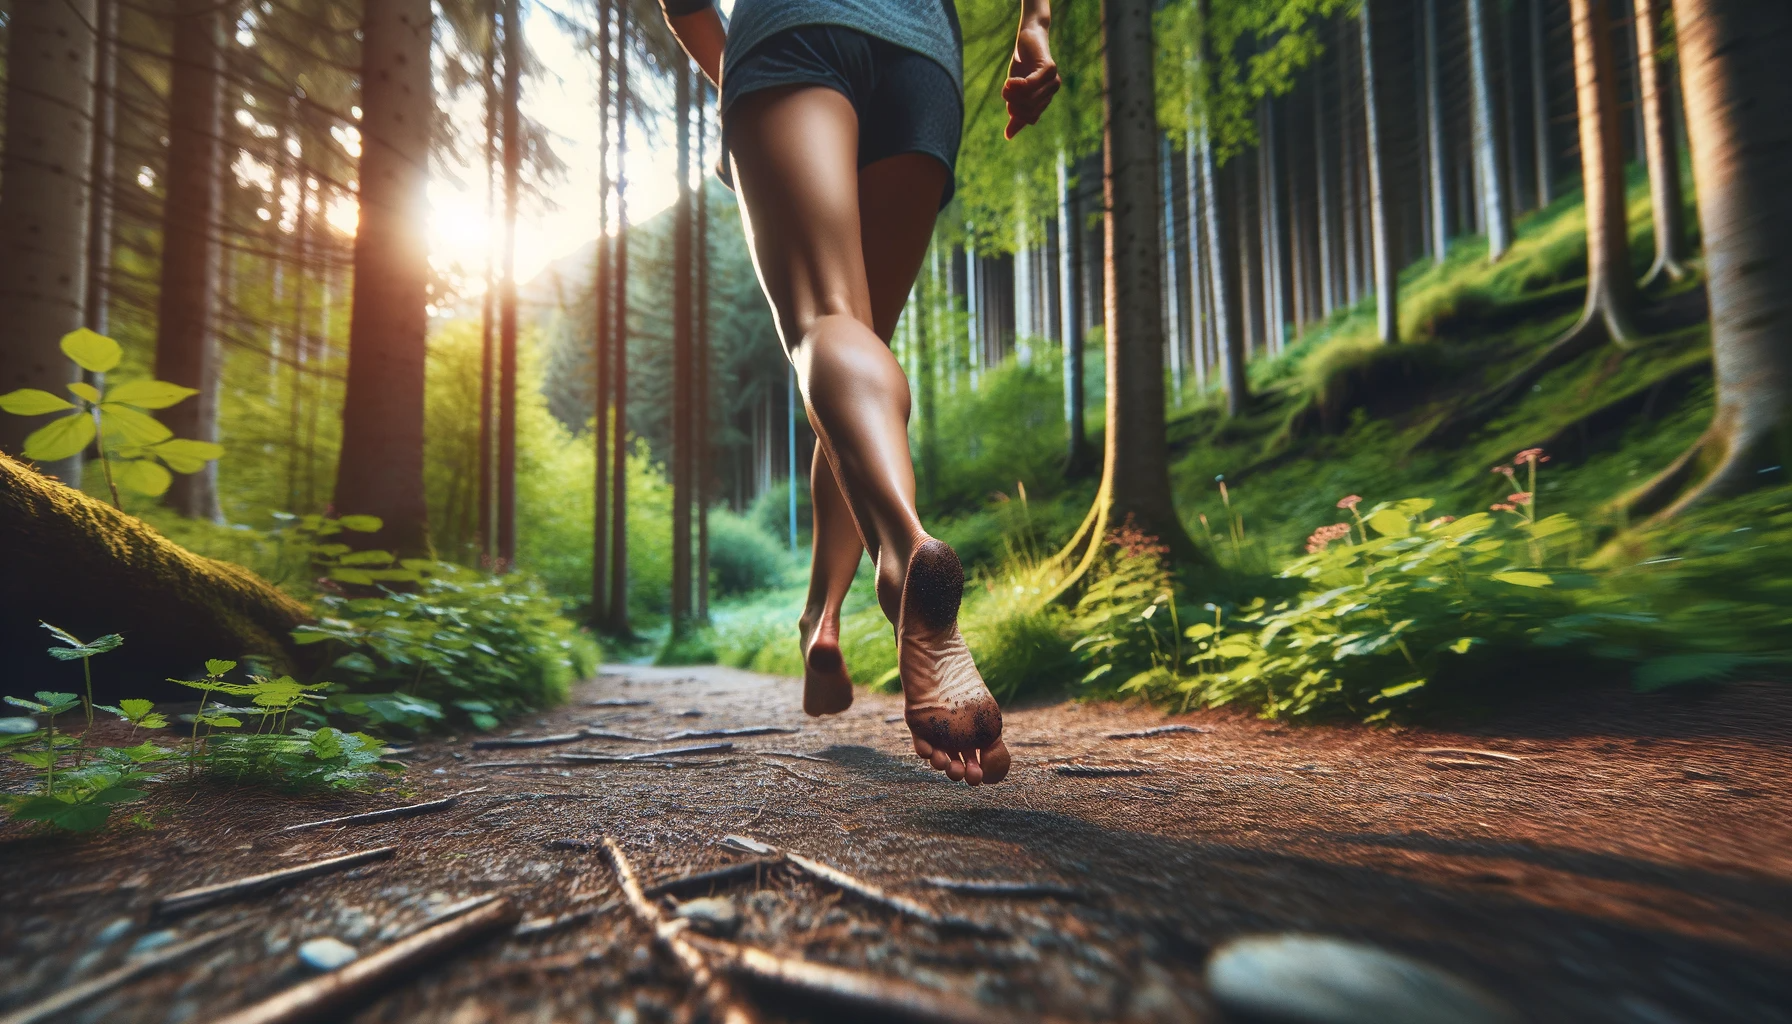 DALL·E 2023-11-10 17.17.02 - A horizontal image capturing a woman running barefoot on a forest trail. The focus is on her feet, vividly showcasing them in motion, mid-run. The sce